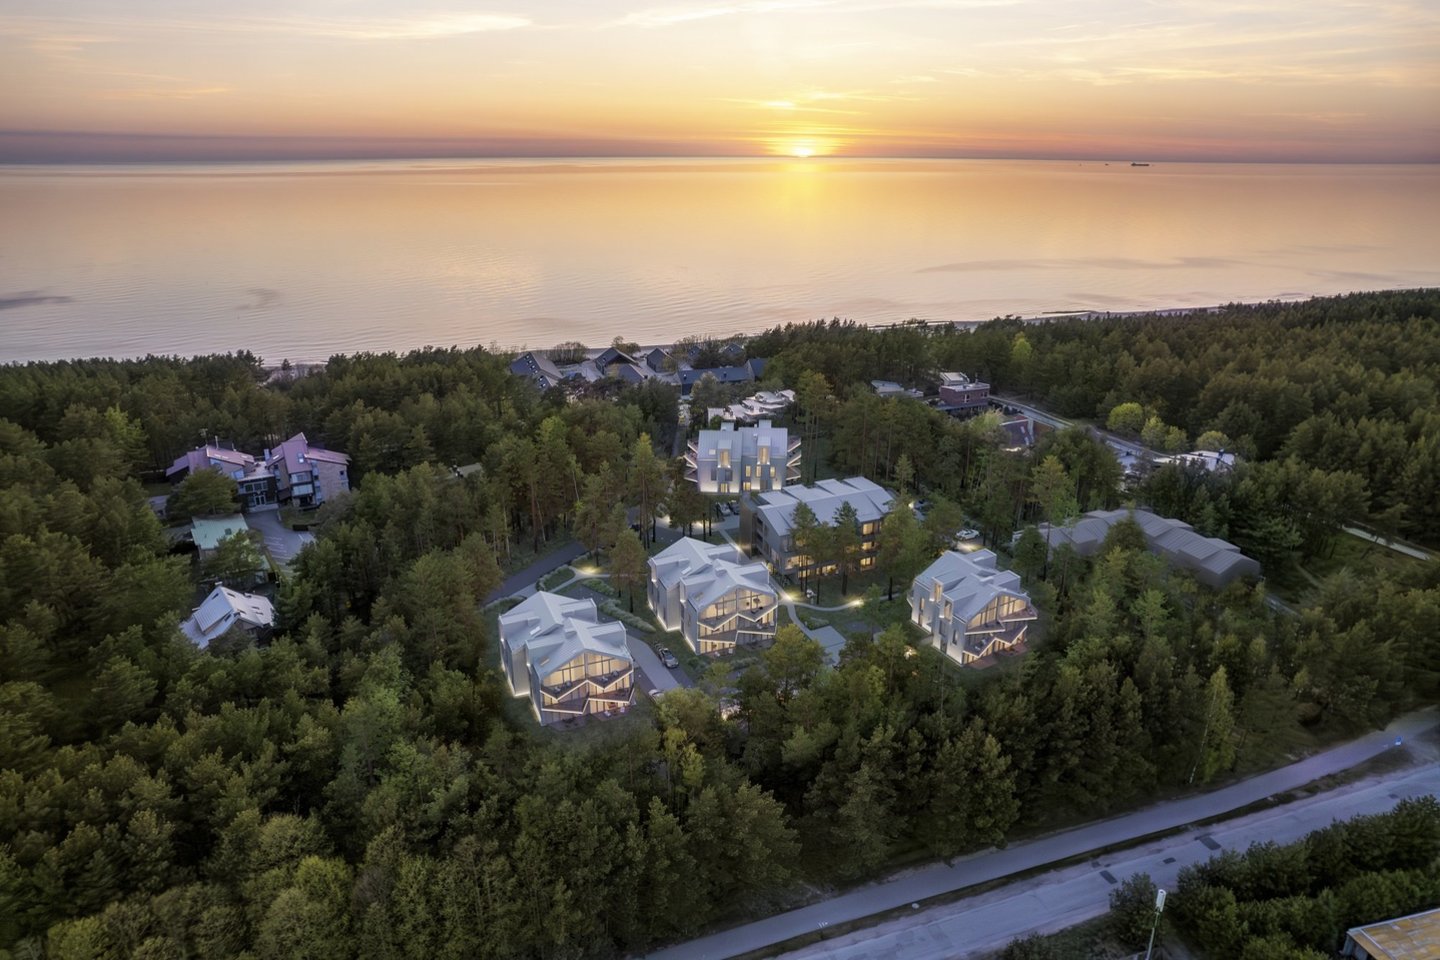 Real estate (RE) agencies claim that even with a slowdown in the country's overall housing market, Lithuanian buyers continue to be attracted to prestigious seaside properties.